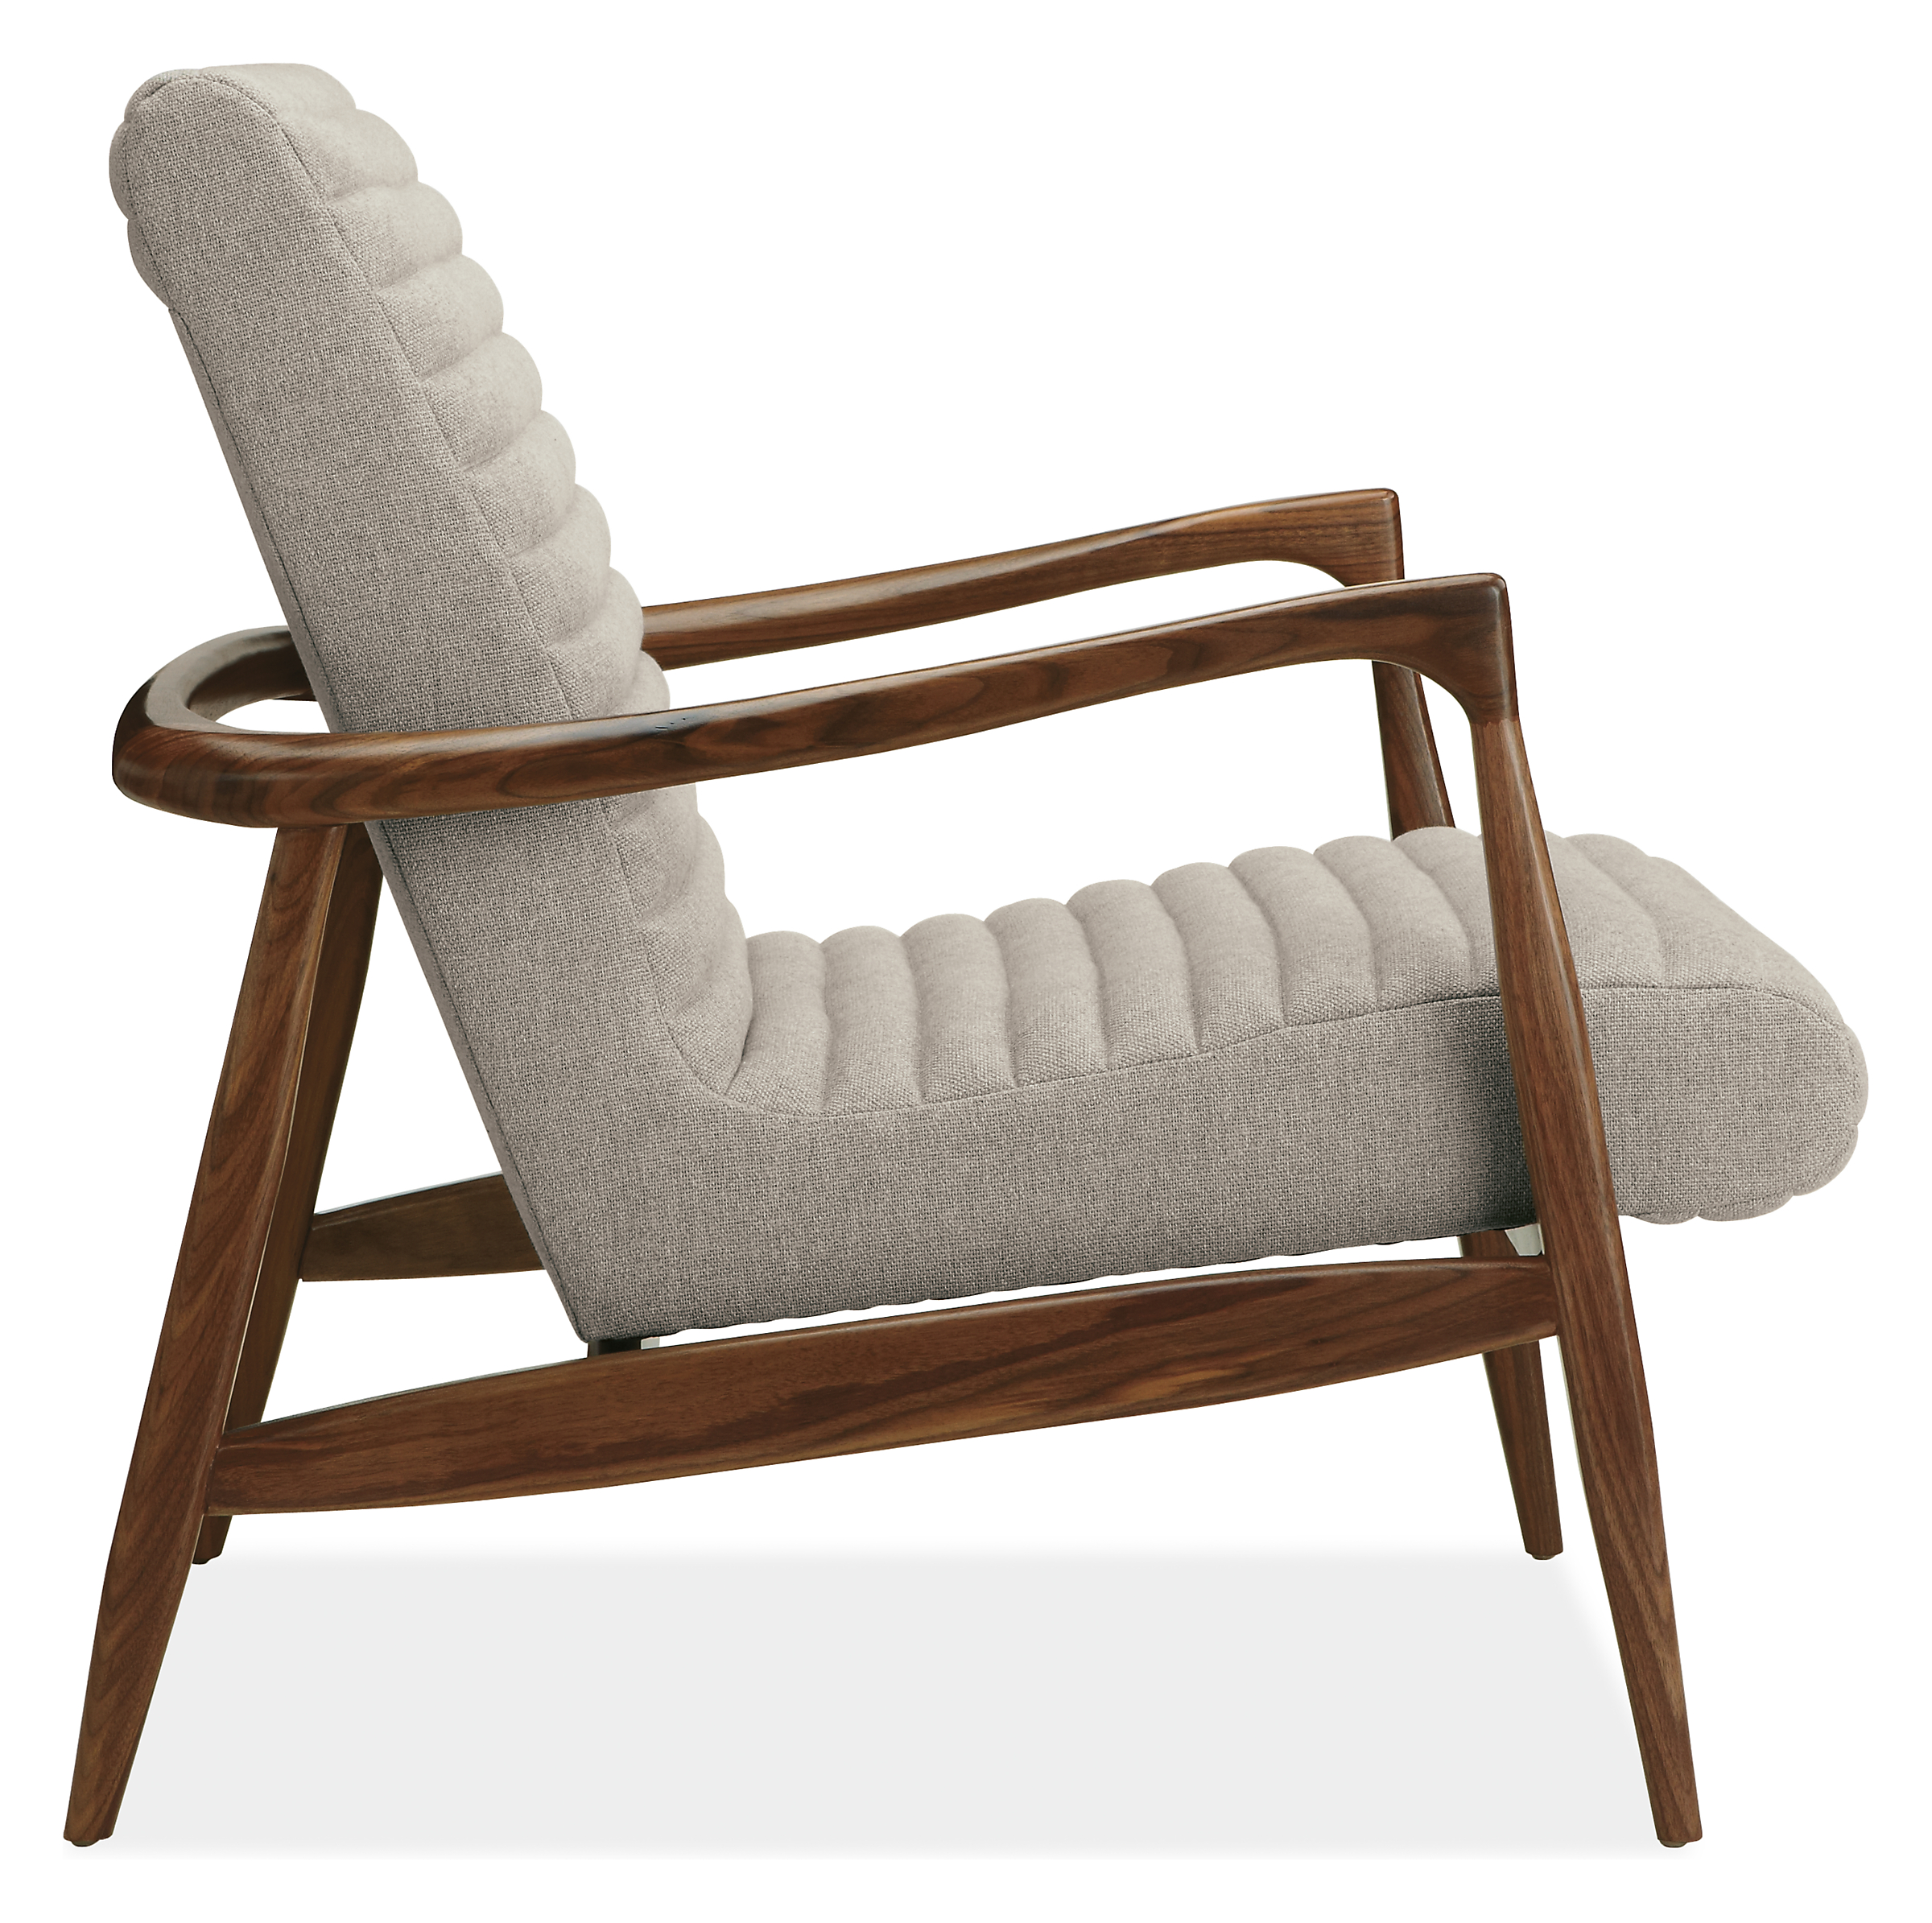 Side view of Callan Chair in Trip Linen with Walnut Base.